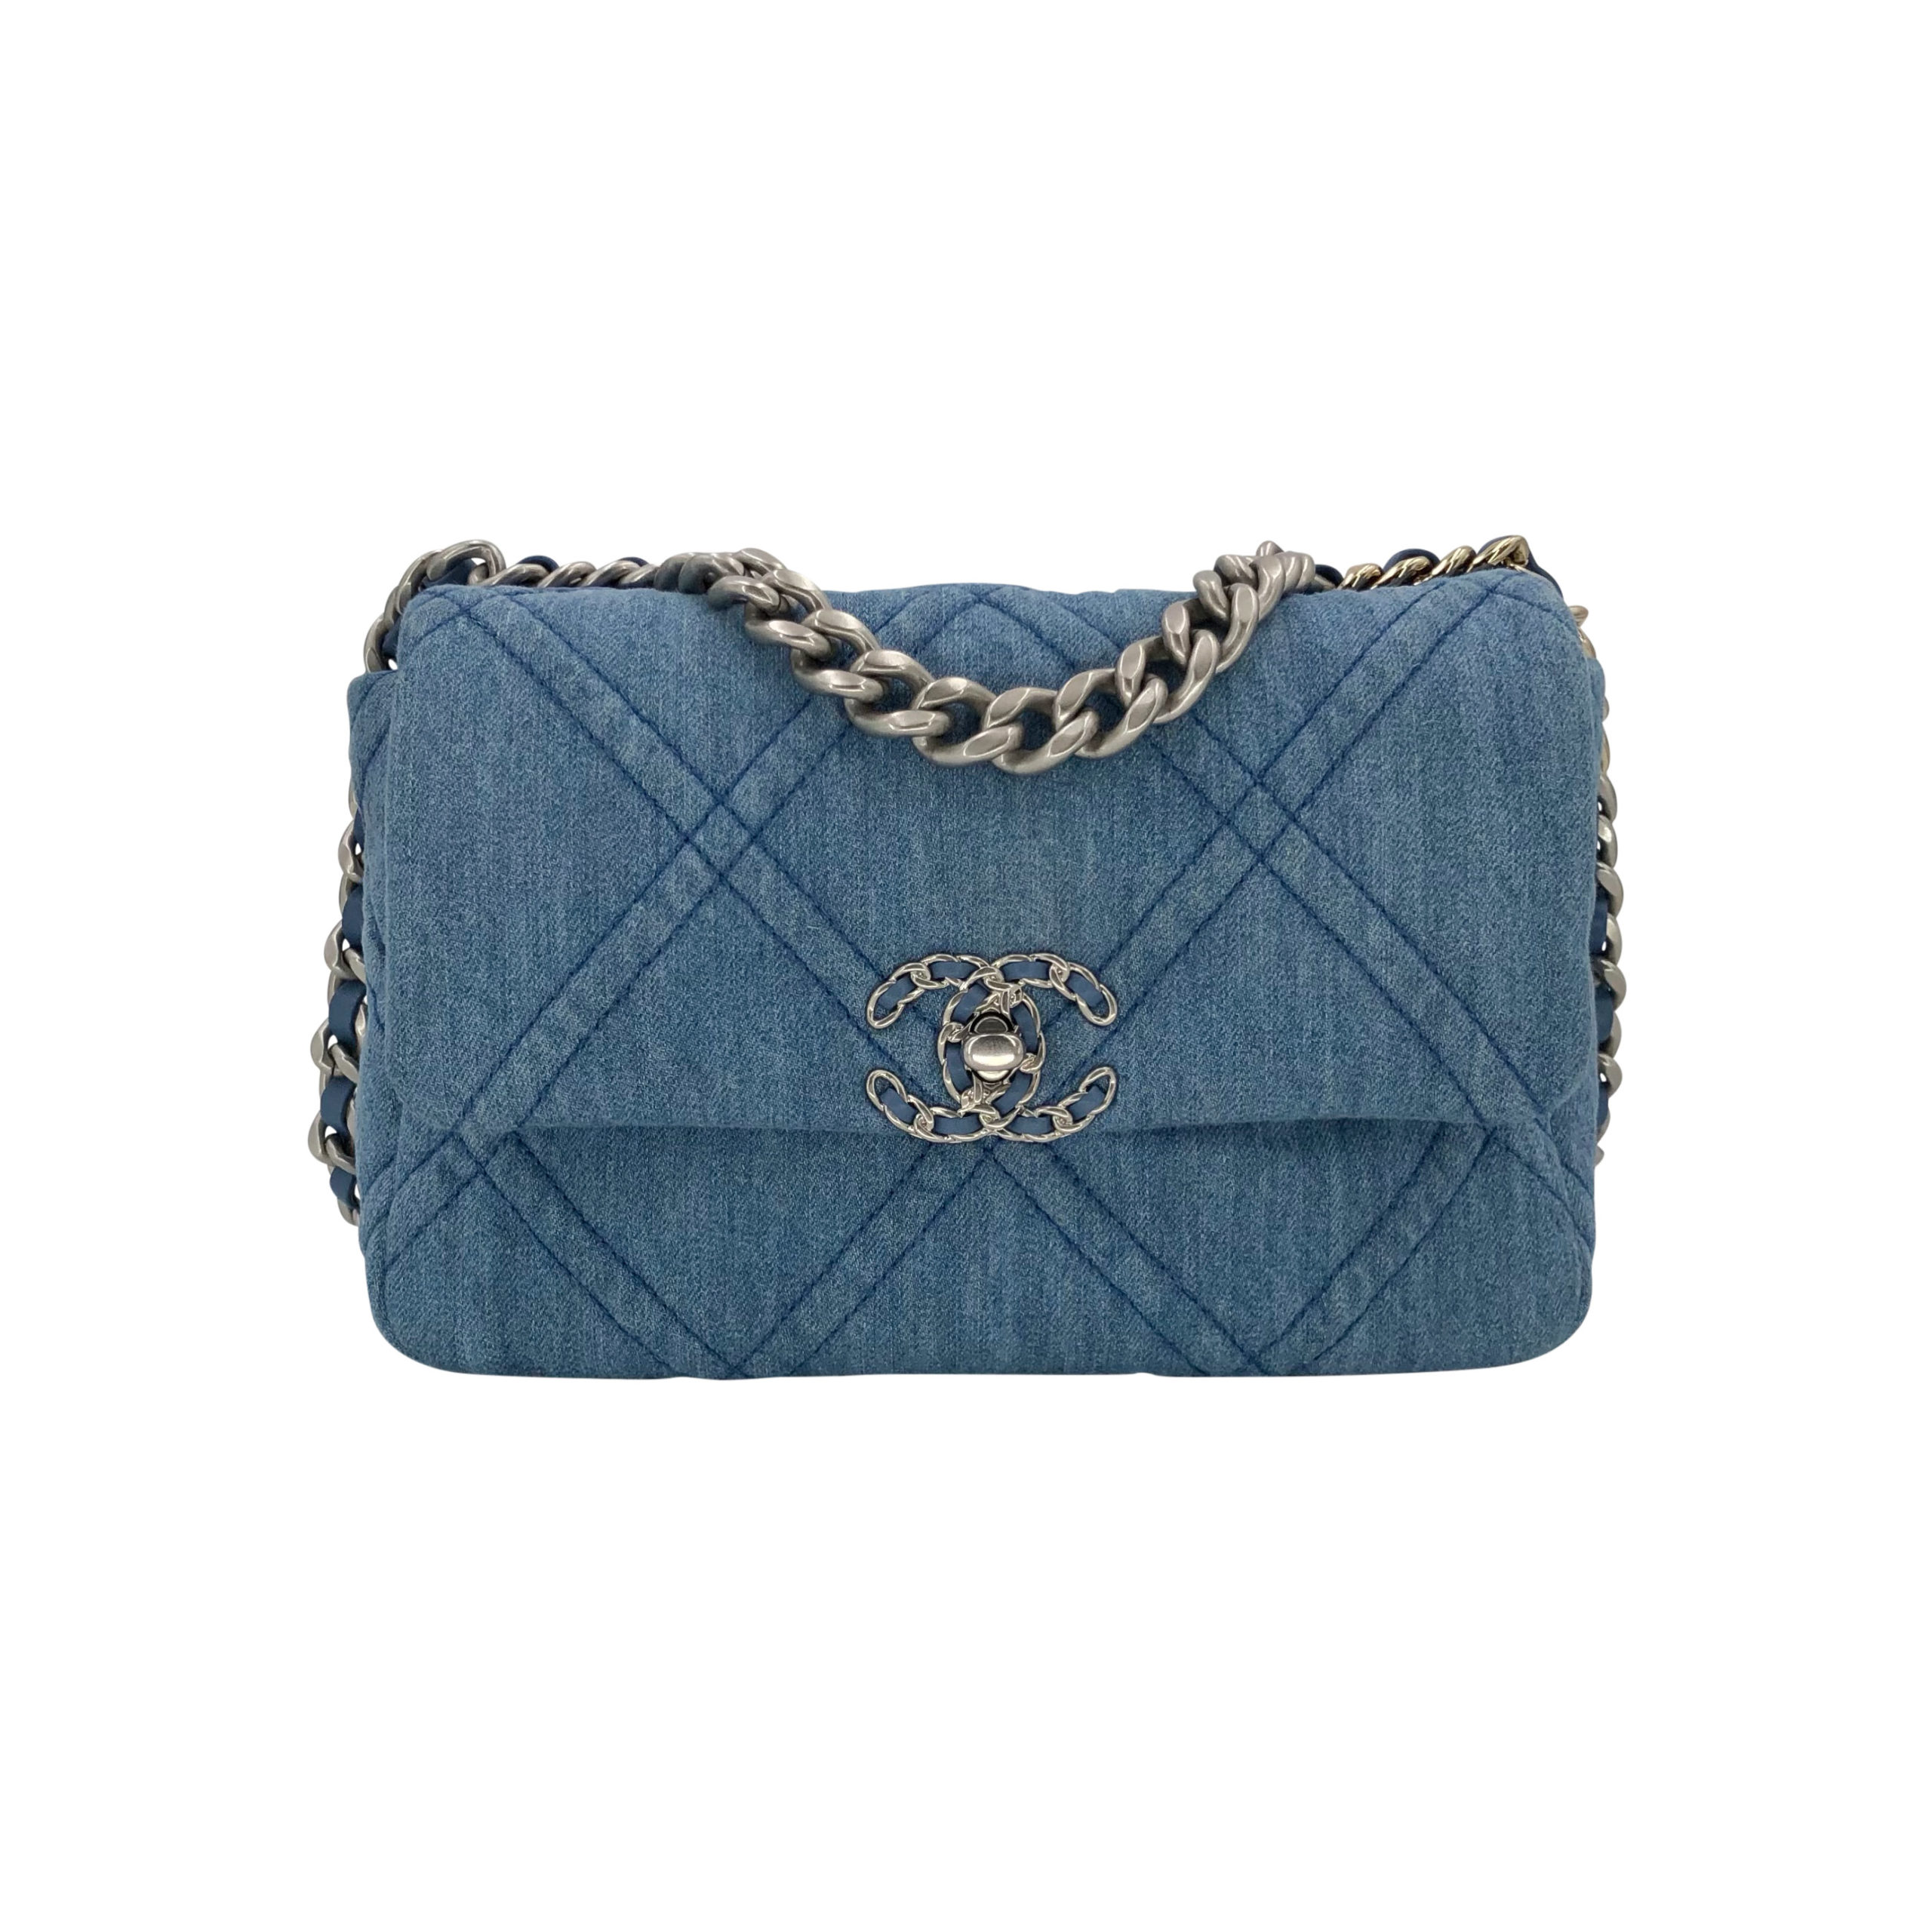 Chanel 19 flap bag in denim with silver & gold hardware - DOWNTOWN UPTOWN  Genève